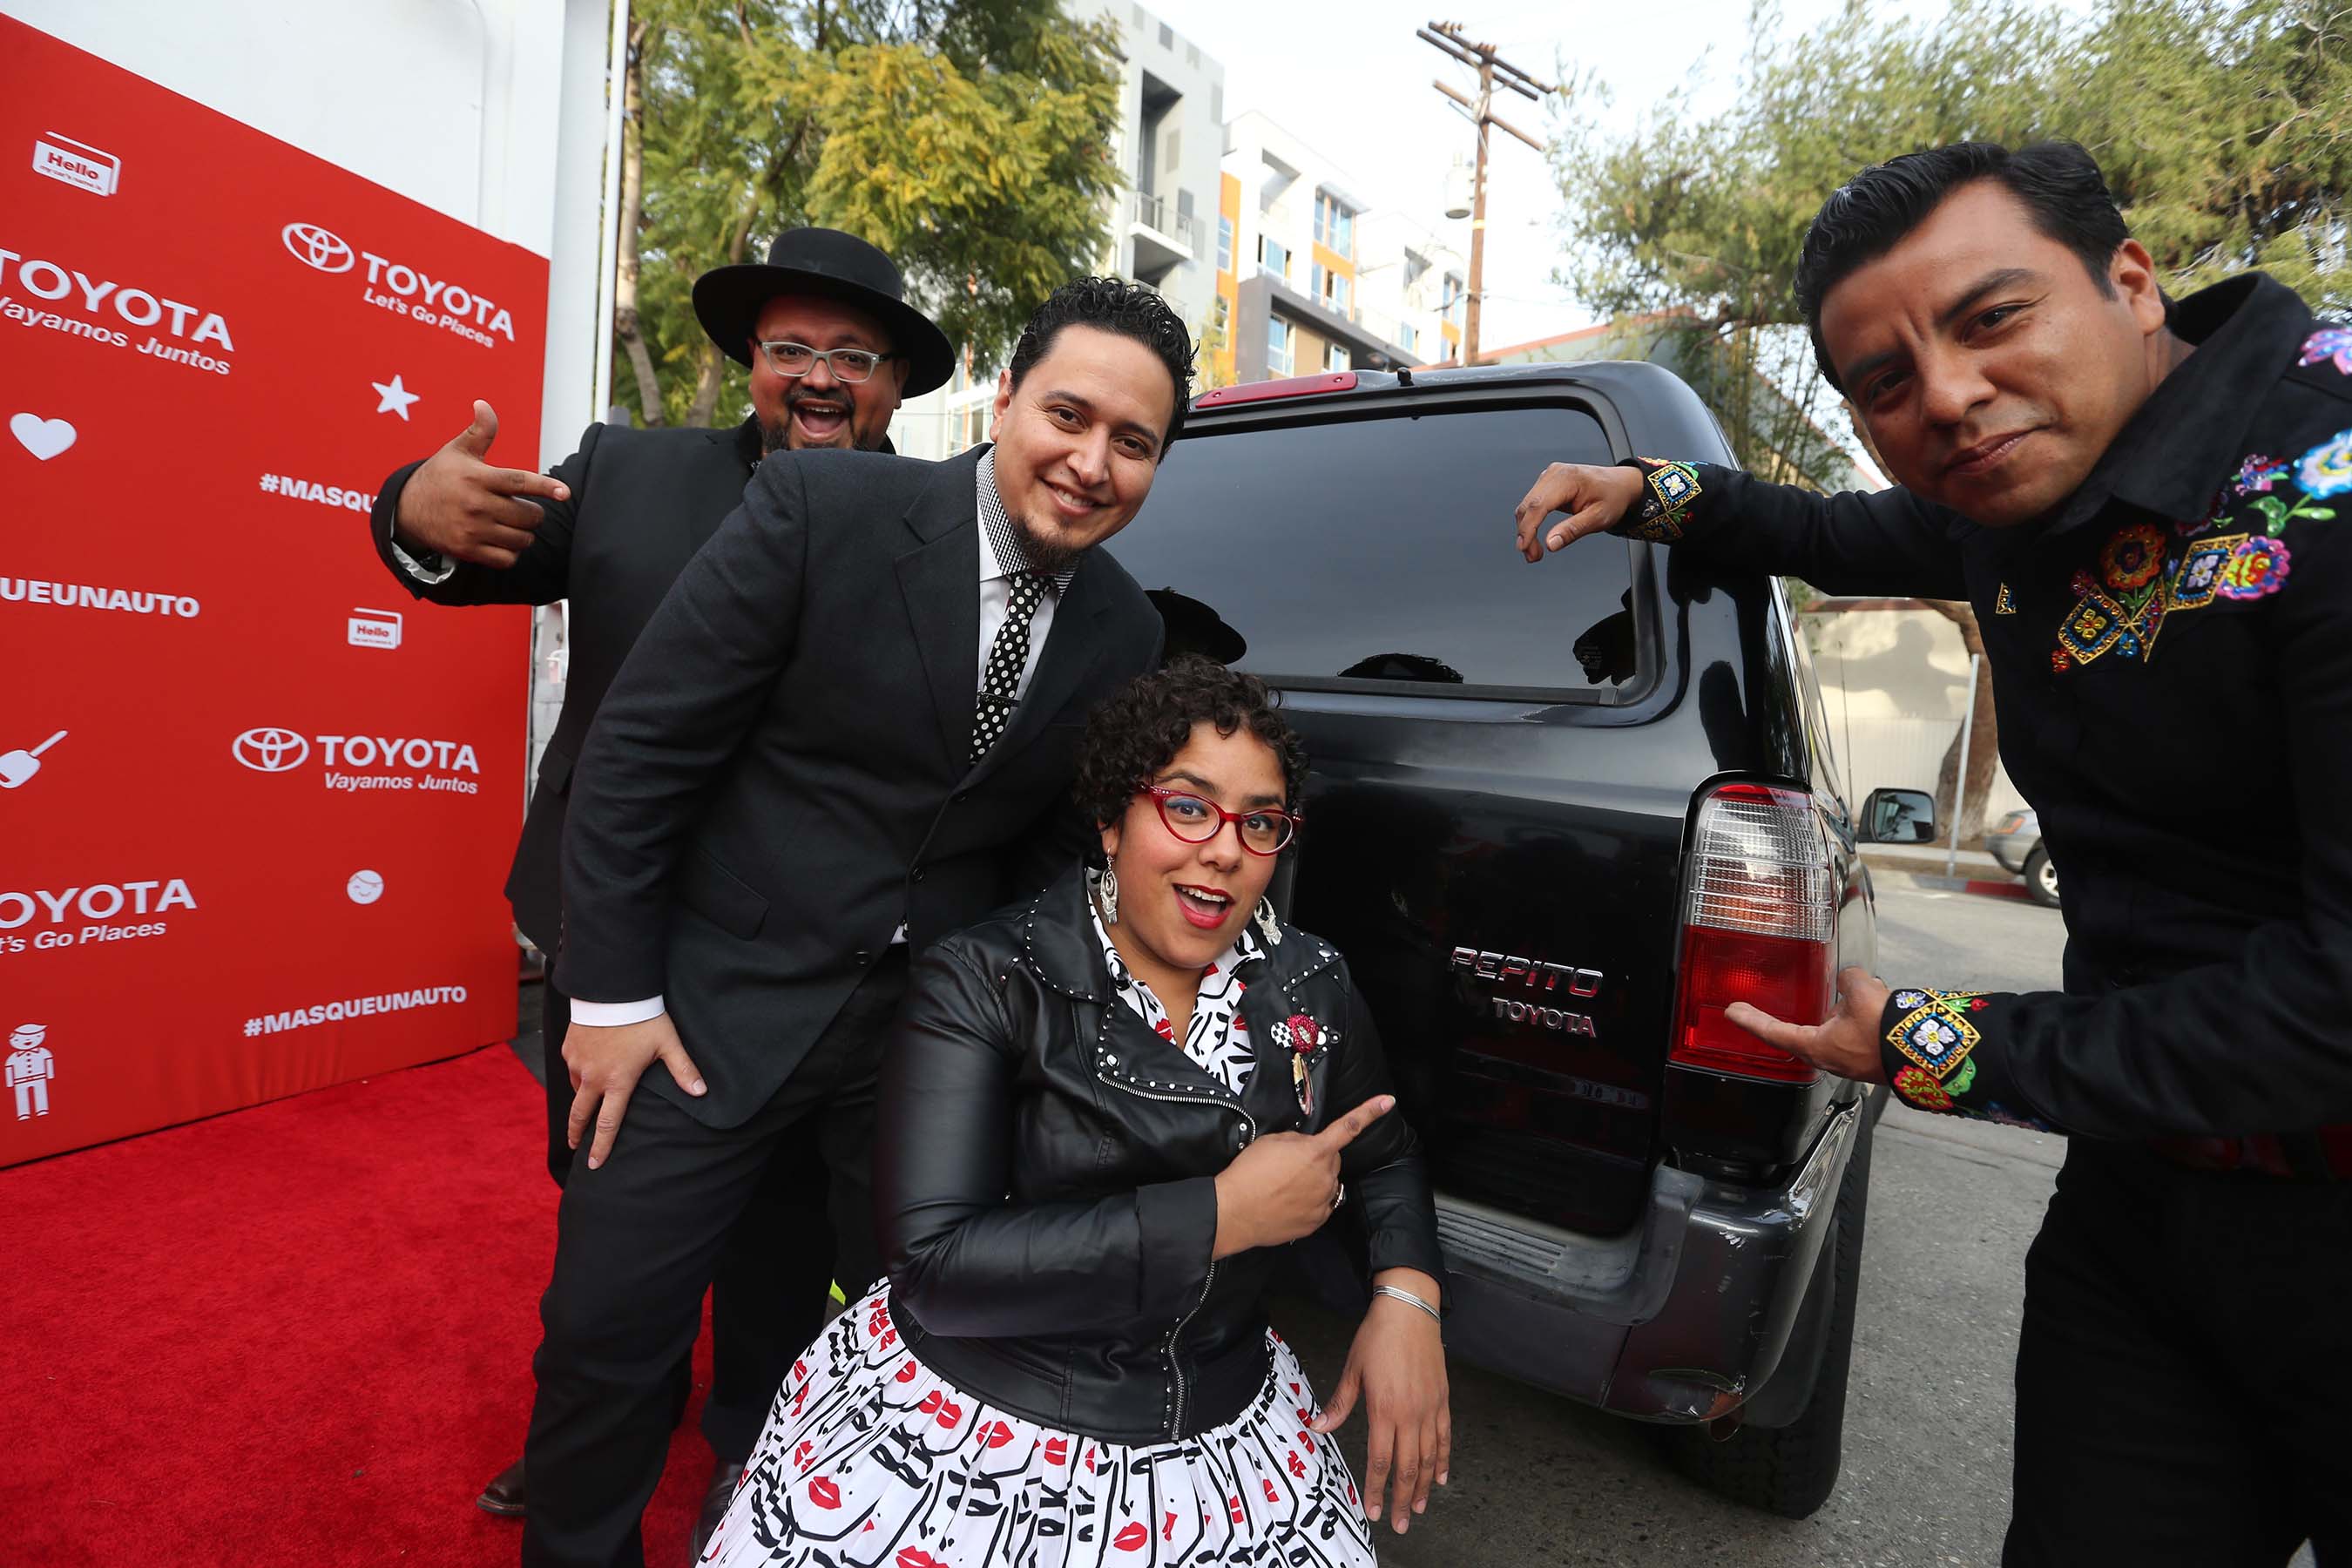 GRAMMY award winning band La Santa Cecilia joined the unveiling of Toyota’s Book of Names and named their car Pepito #MasQueUnAuto.